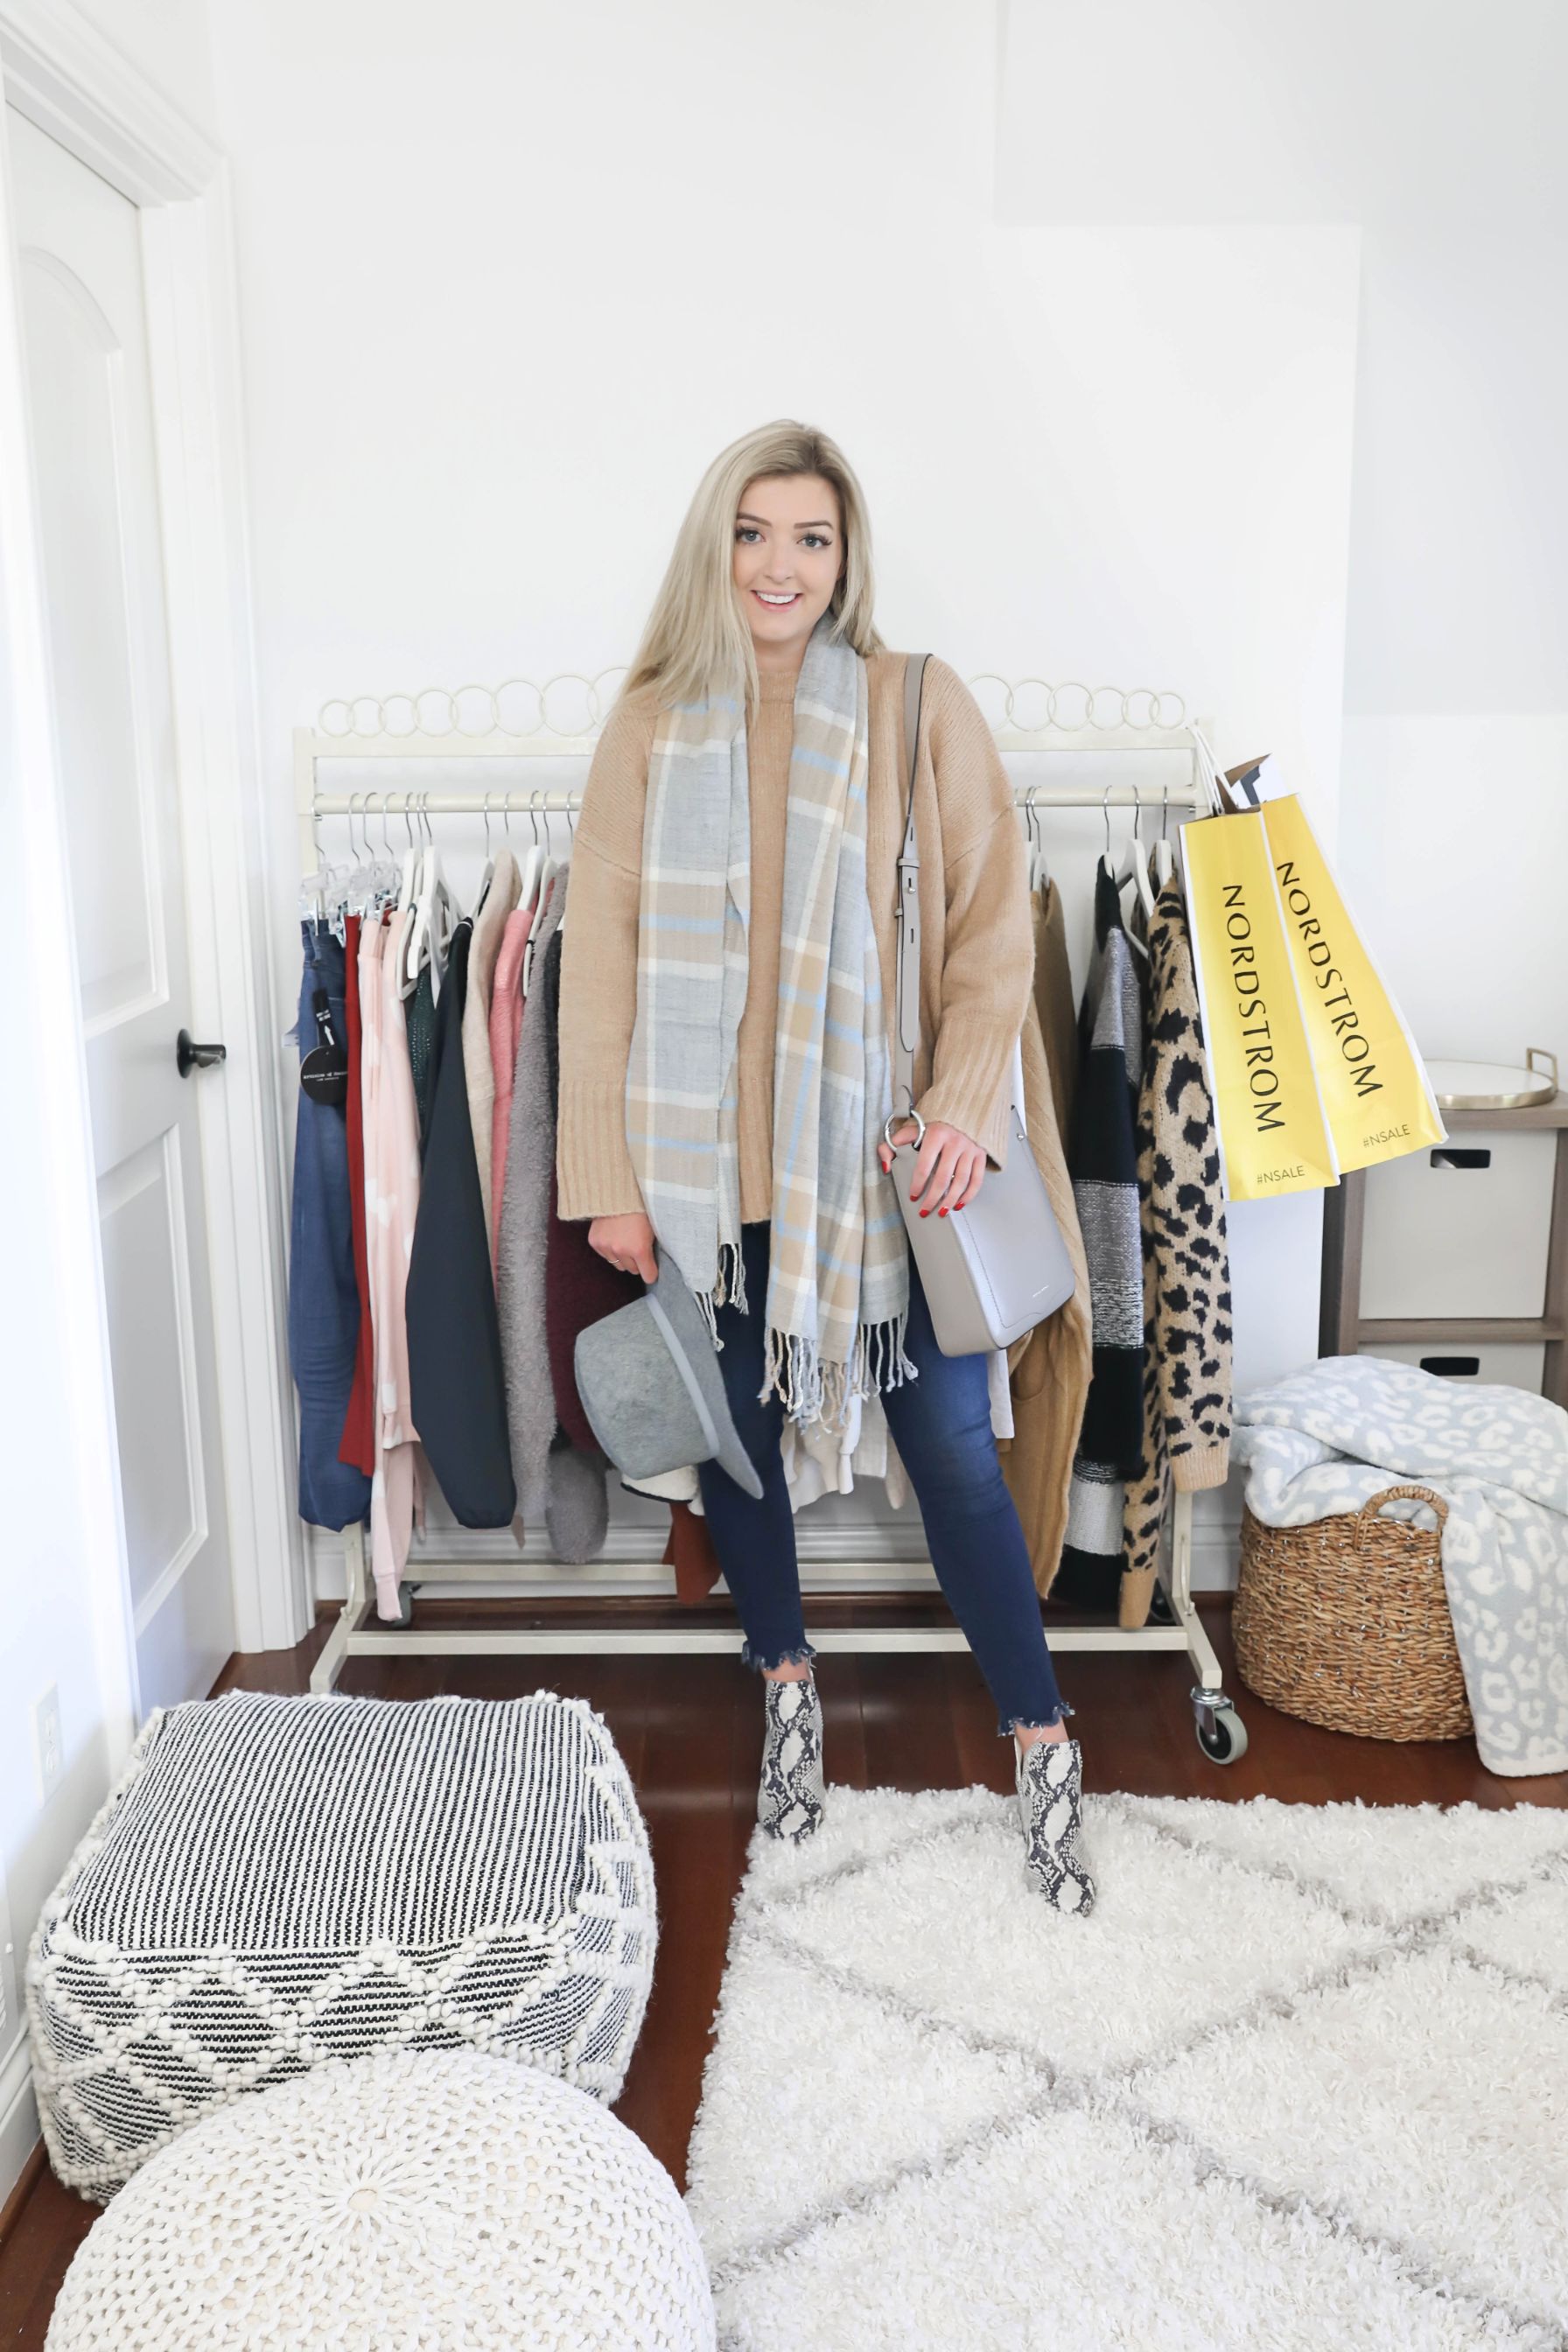 Nordstrom Anniversary Sale 2019! All the best shoes and accessories in one roundup! I am also sharing some cute scarves and hats! Which are your favorite? I love the booties this year! Details on daily dose of charm by lauren lindmark